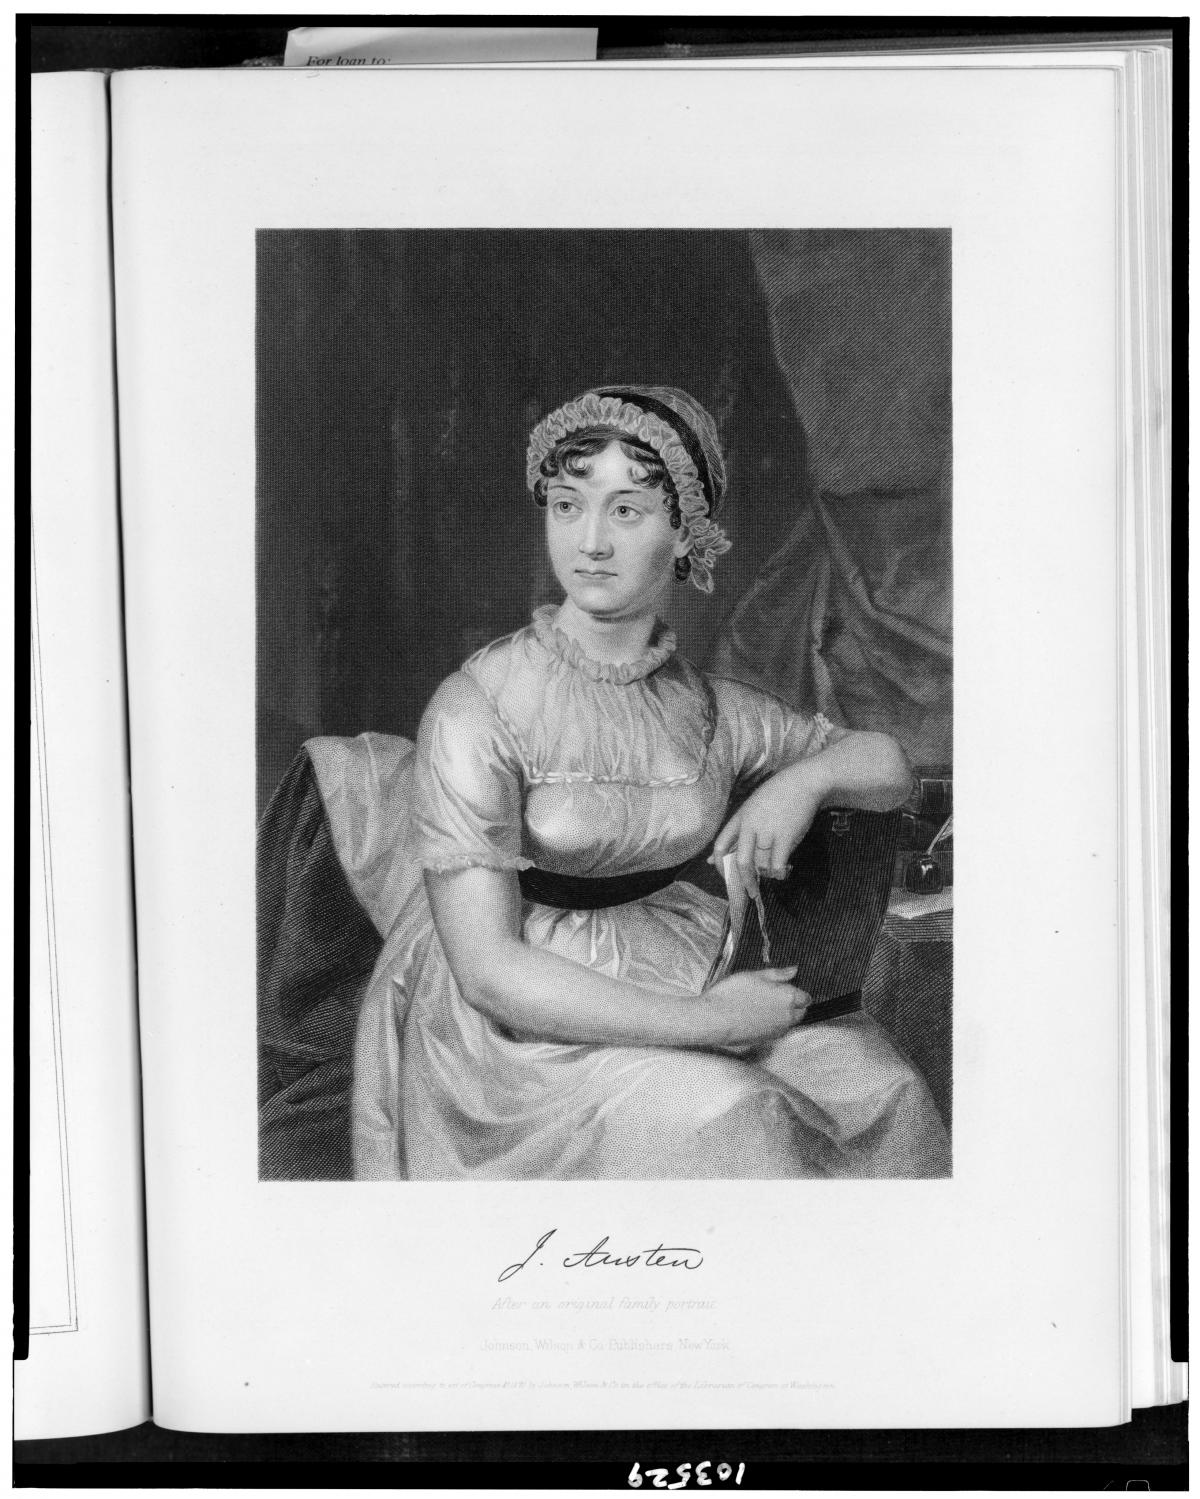 Austen in a white dress and bonnet, seated, with her elbow resting on a table